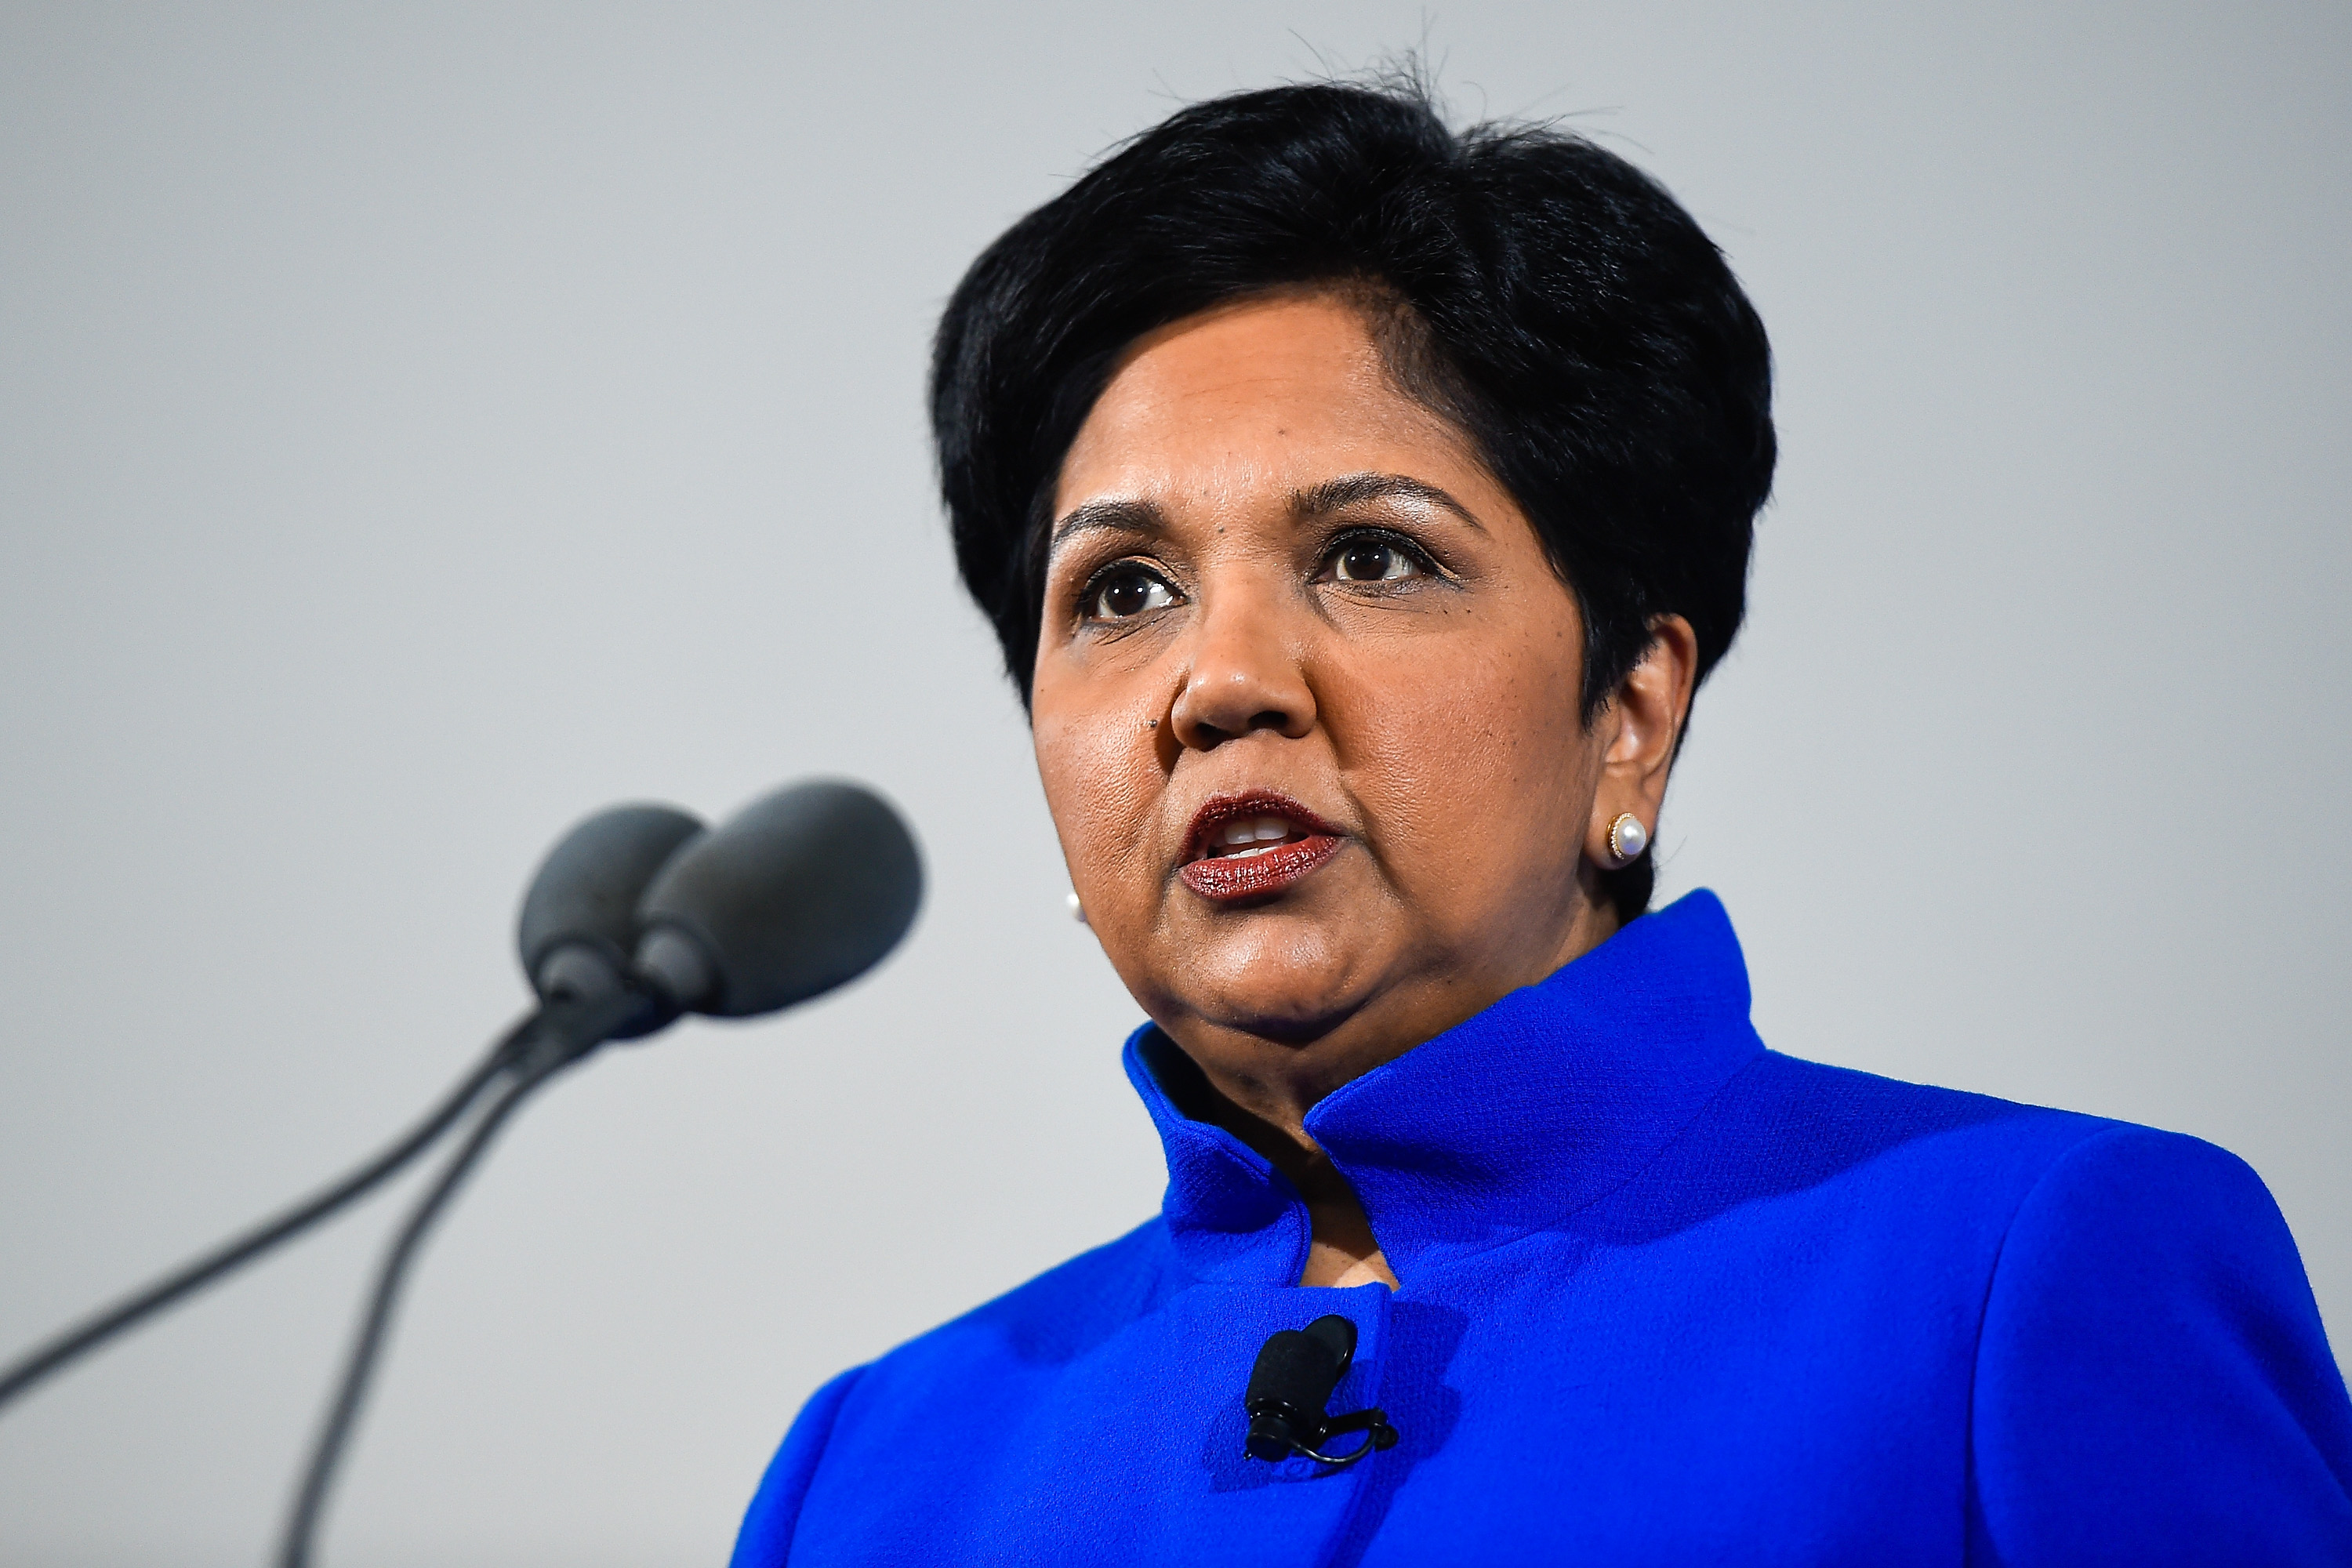 Pepsico CEO Indra Nooyi named as ICC's first female Independent Director